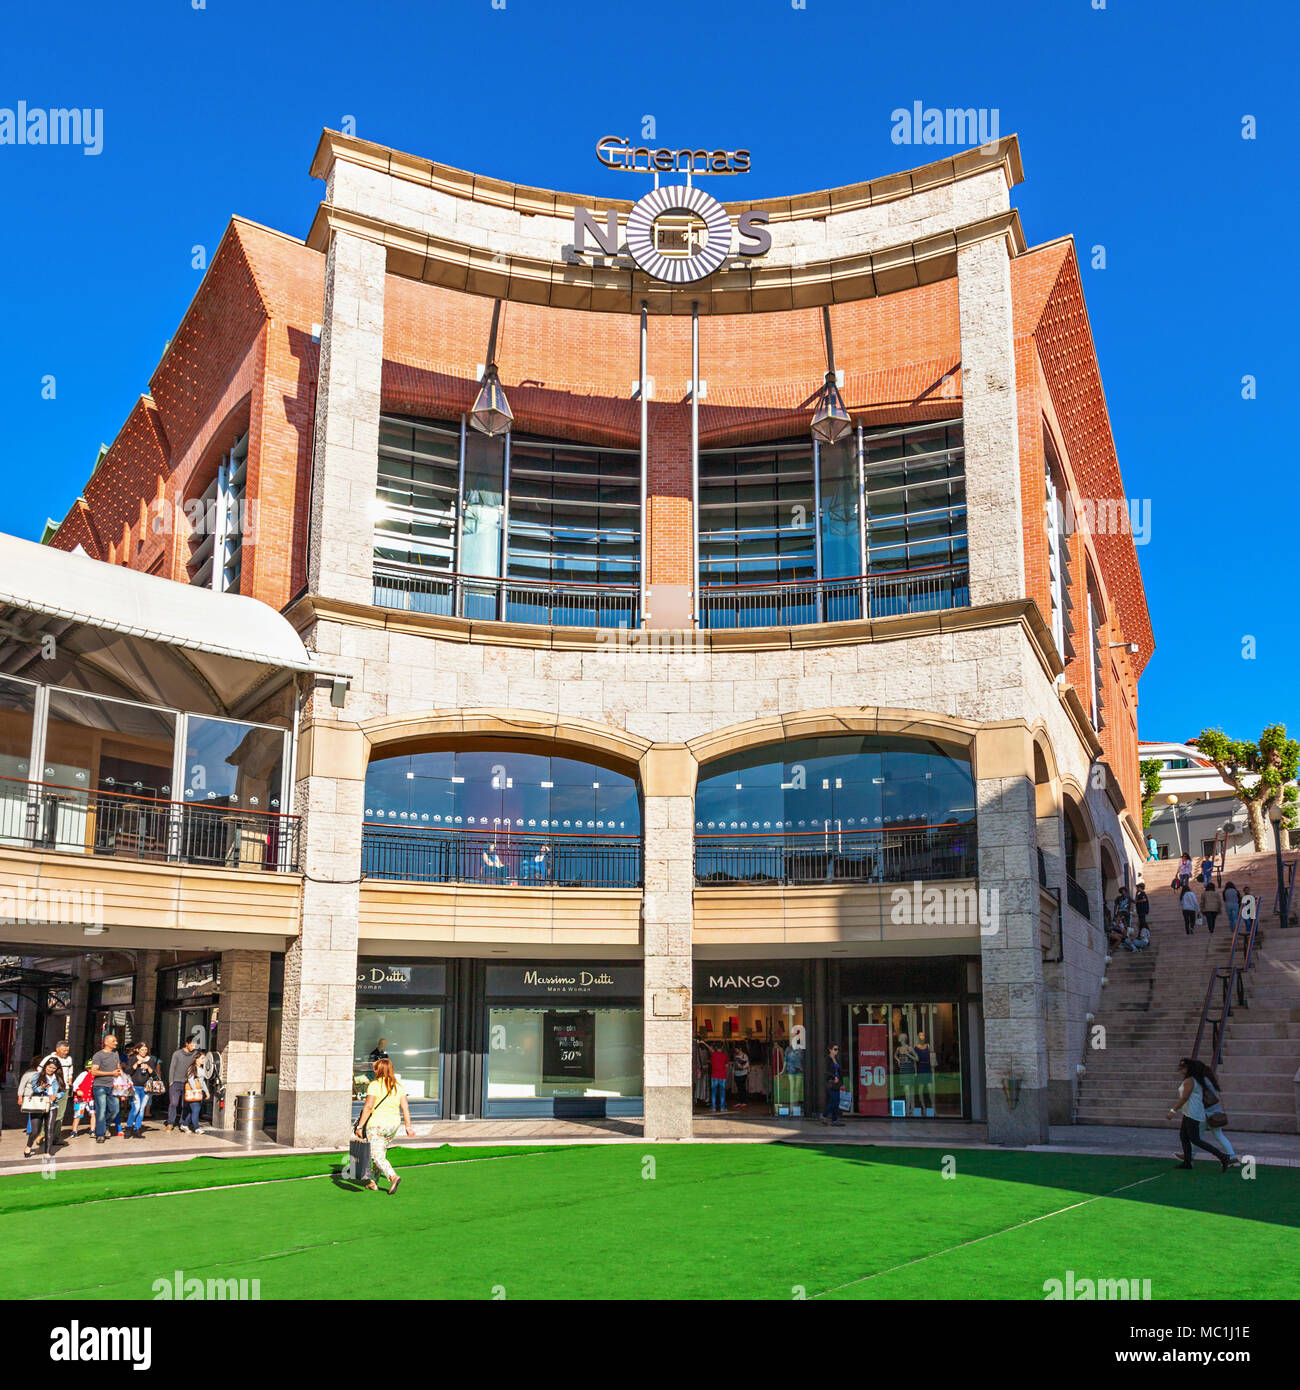 AVEIRO, PORTUGAL - JULY 02: The Forum is a large, open shopping center on  July 02, 2014 in Aveiro, Portugal Stock Photo - Alamy